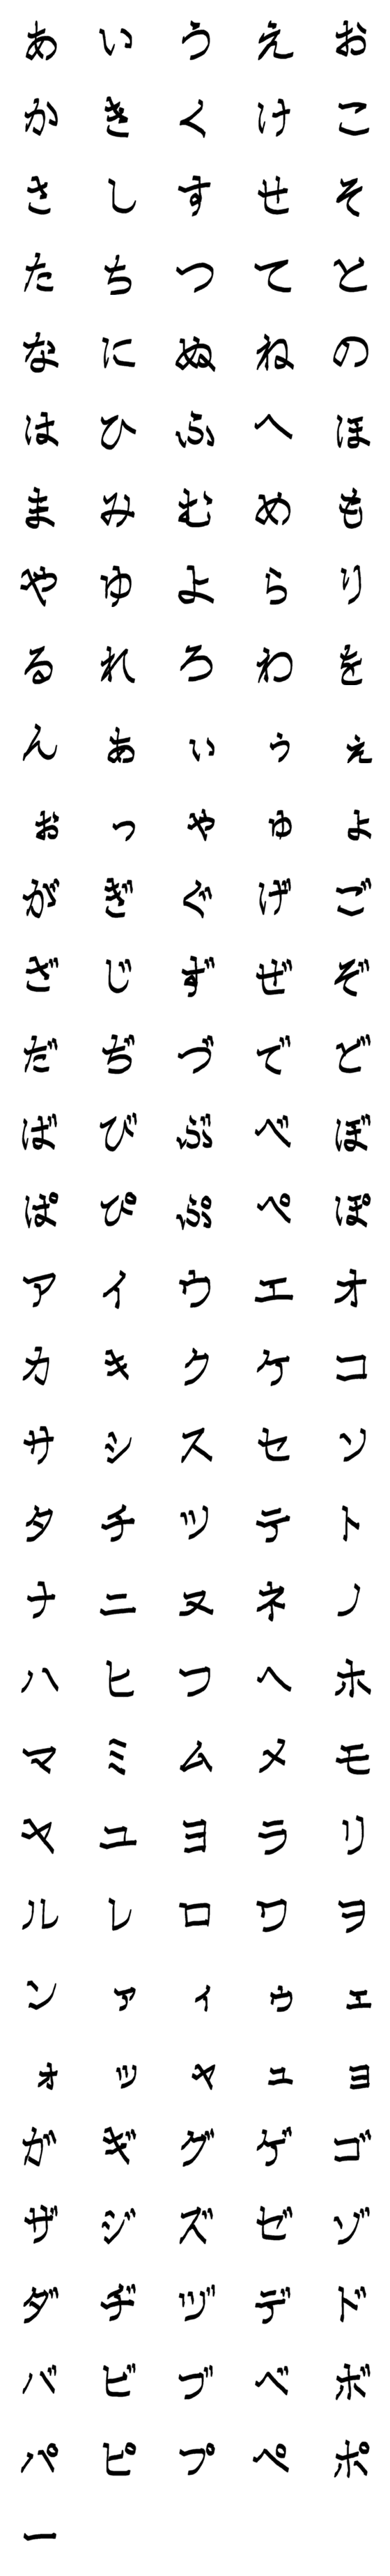 [LINE絵文字]～クセ（癖）強め～の画像一覧